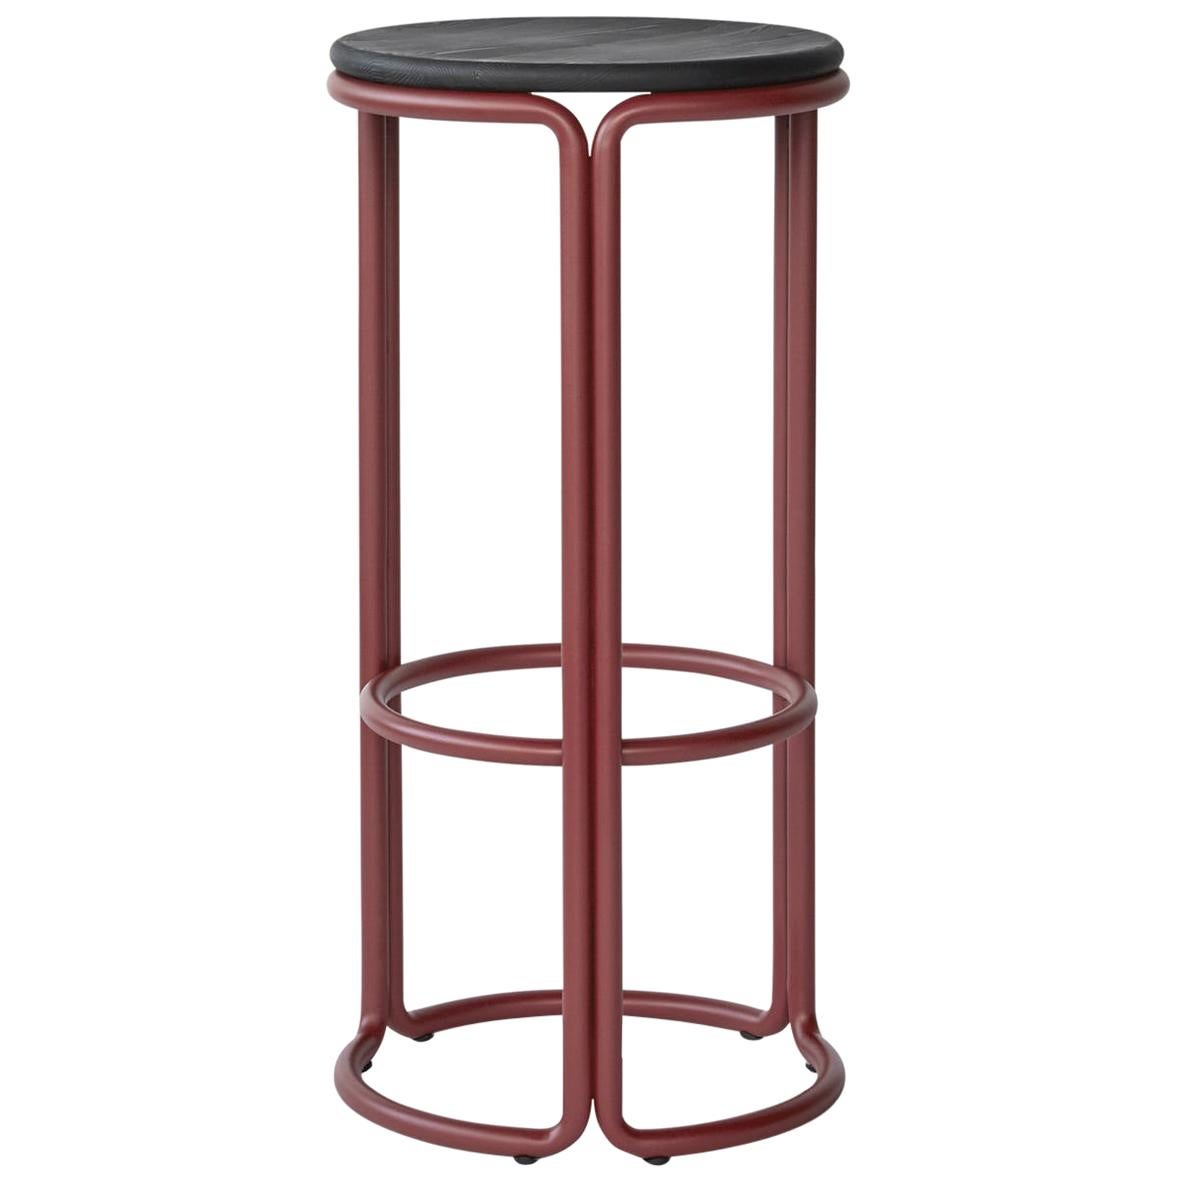 Hardie Bar Stool with Wood Seat and Basque Red Steel Frame